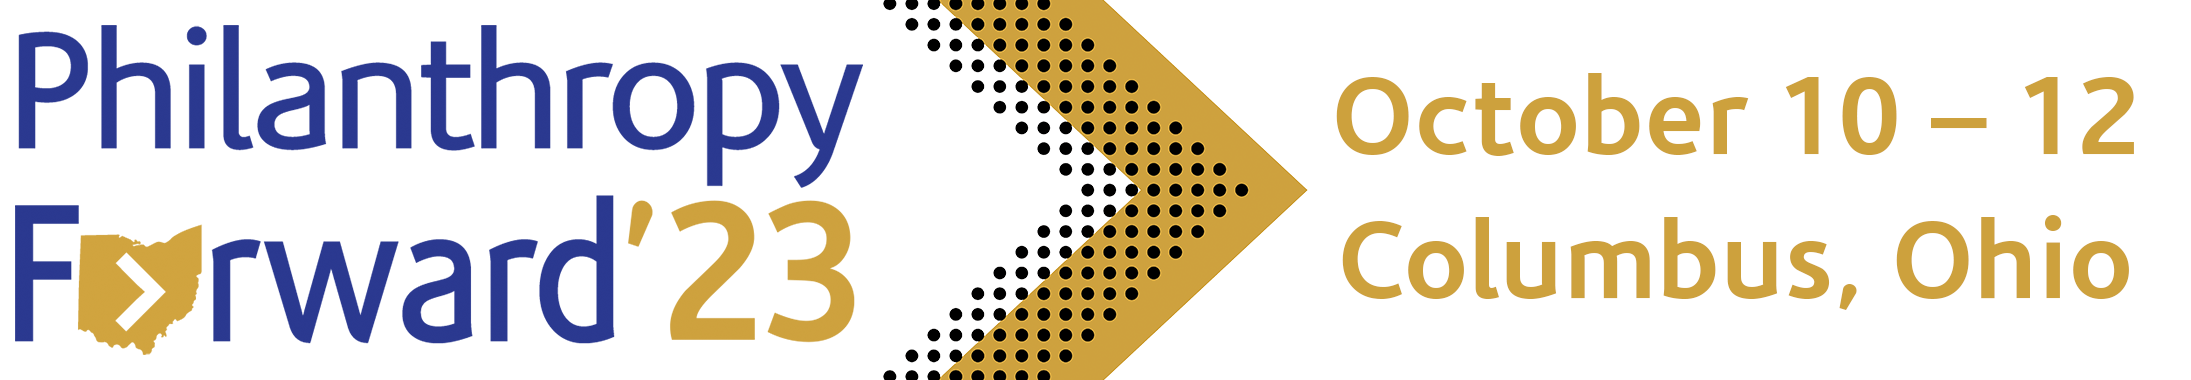 conference logo with black and gold arrow